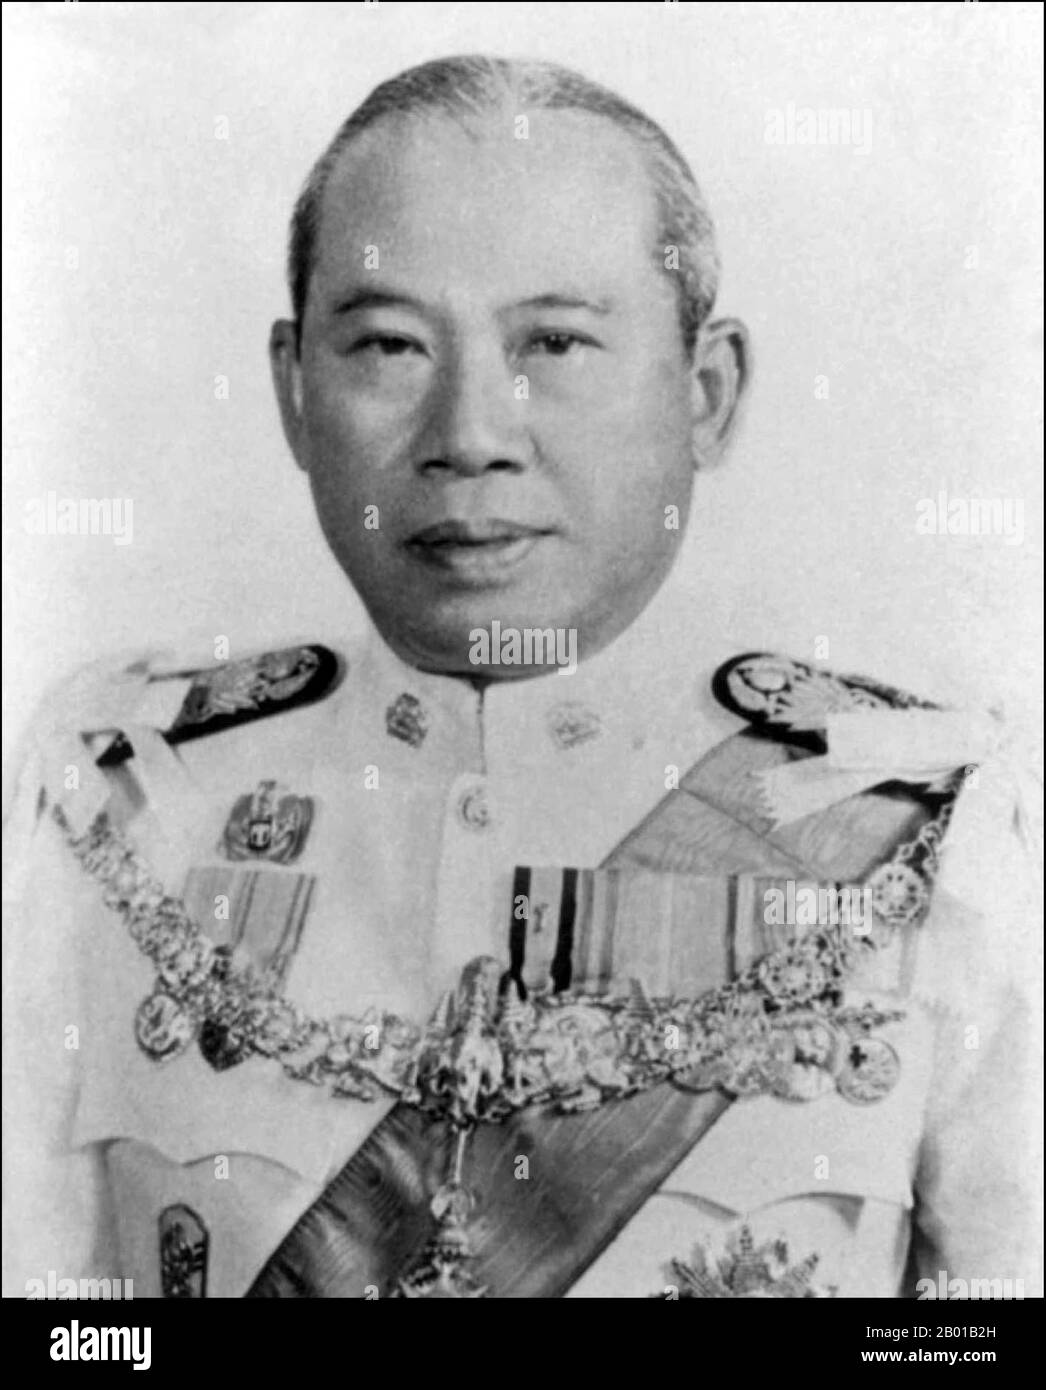 Thailand: Field Marshal Thanom Kittikachorn ( 11 August 1911 - 16 June 2004), 10th Prime Minister of Thailand (r. 1958, 1963-1973), 1971.  Field Marshal Thanom Kittikachorn was a military dictator and a staunch anti-Communist, who oversaw a decade of military rule in Thailand from 1963 to 1973, until public protests which exploded into violence forced him to step down. His return from exile in 1976 sparked protests which led to a massacre of student demonstrators at Thammasat University by far right militants aided by government security forces, followed by a military coup. Stock Photo